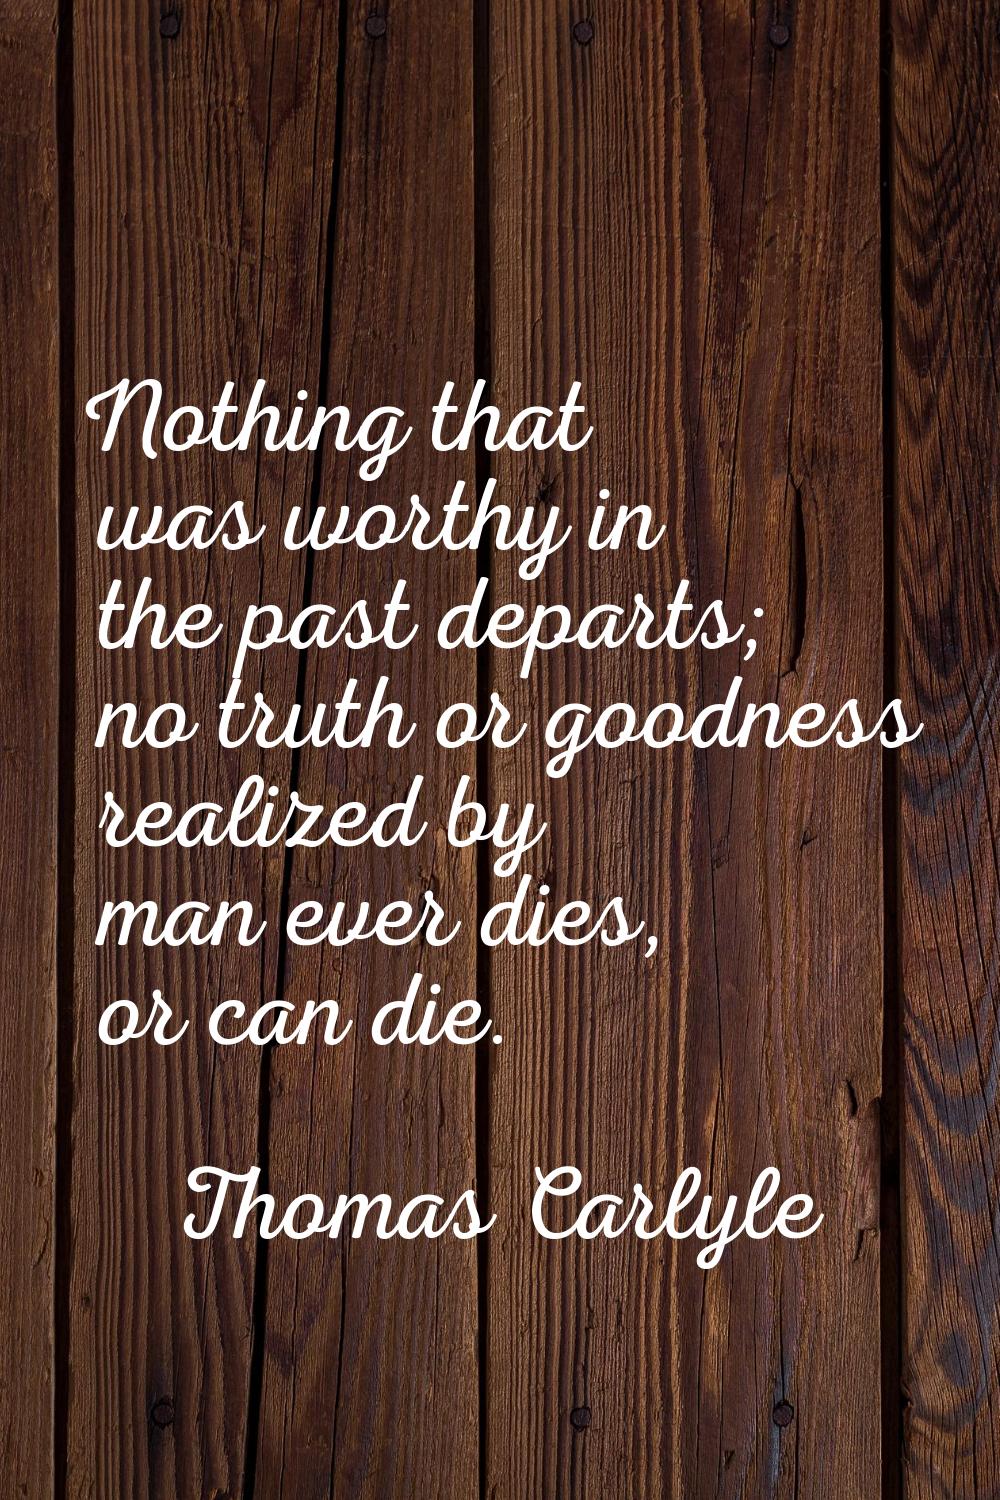 Nothing that was worthy in the past departs; no truth or goodness realized by man ever dies, or can